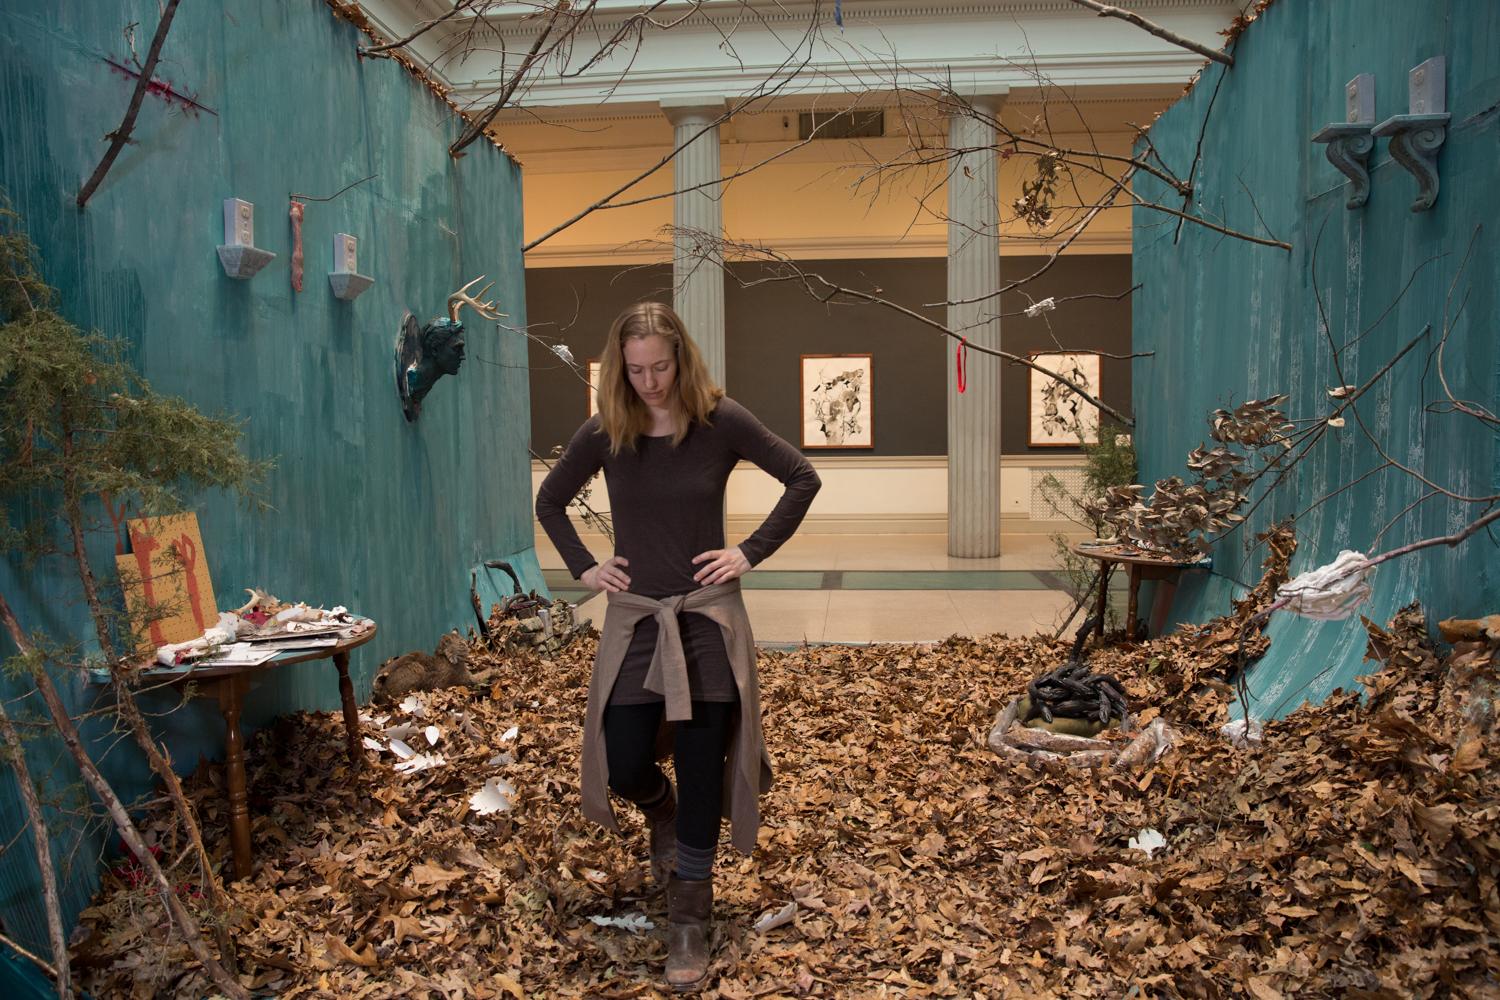 Senior Whitney Waller, stands in her immersive, fall-themed installation, "Dasein."